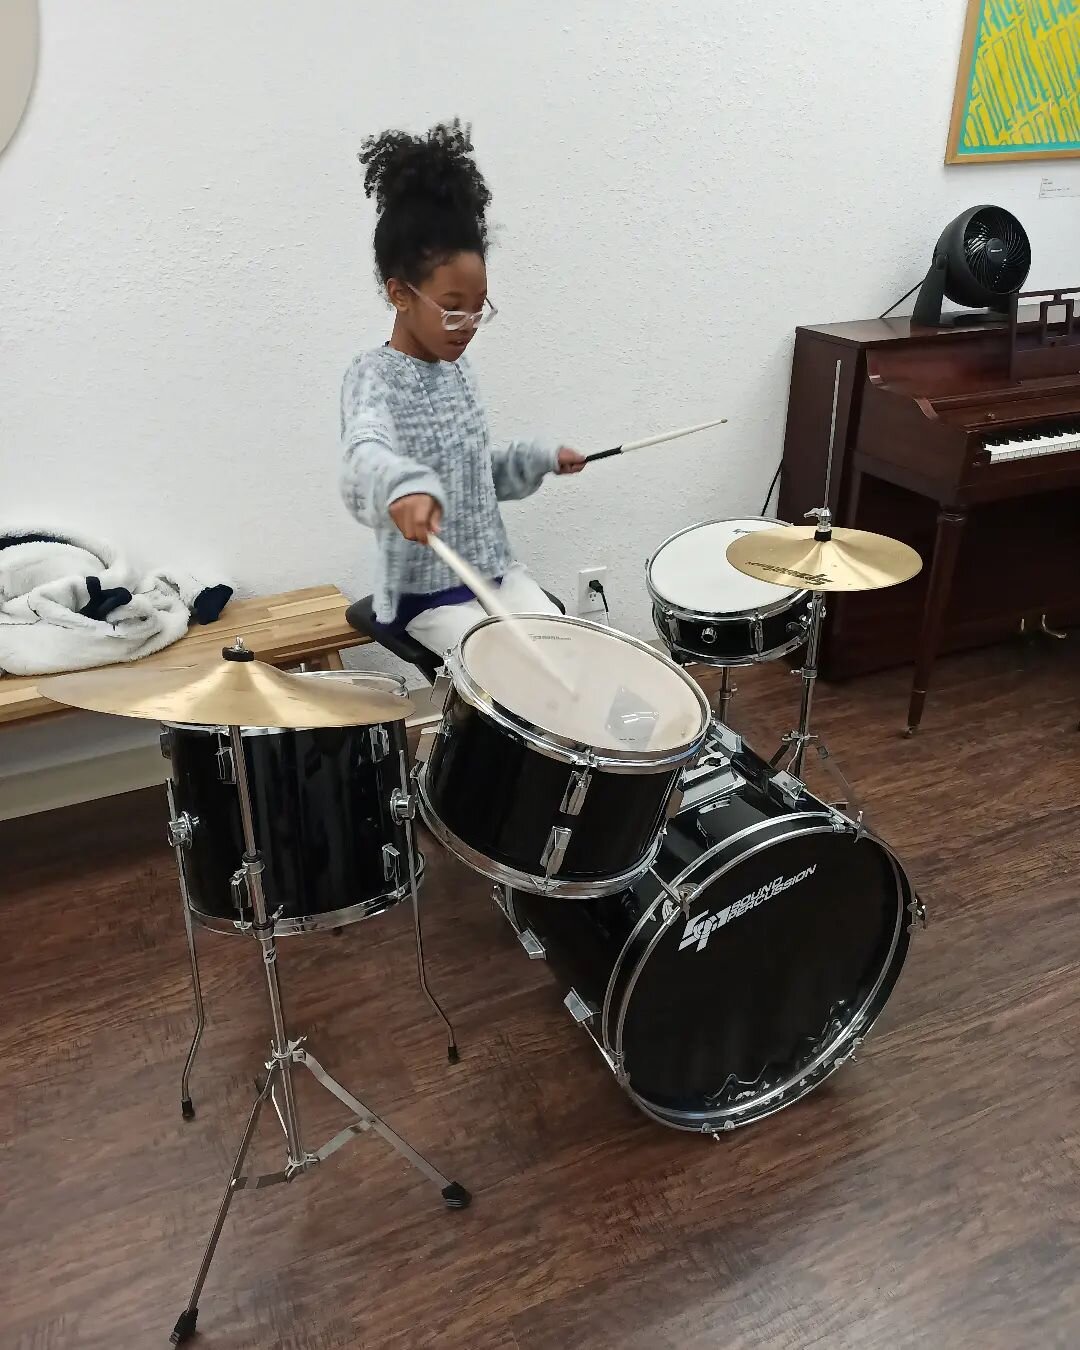 We love getting to grow and learn alongside our students!
.
#newcottagearts #newcottageartsdenver #music #musiclessons #musicclasses #drummingclass #drummingclasses